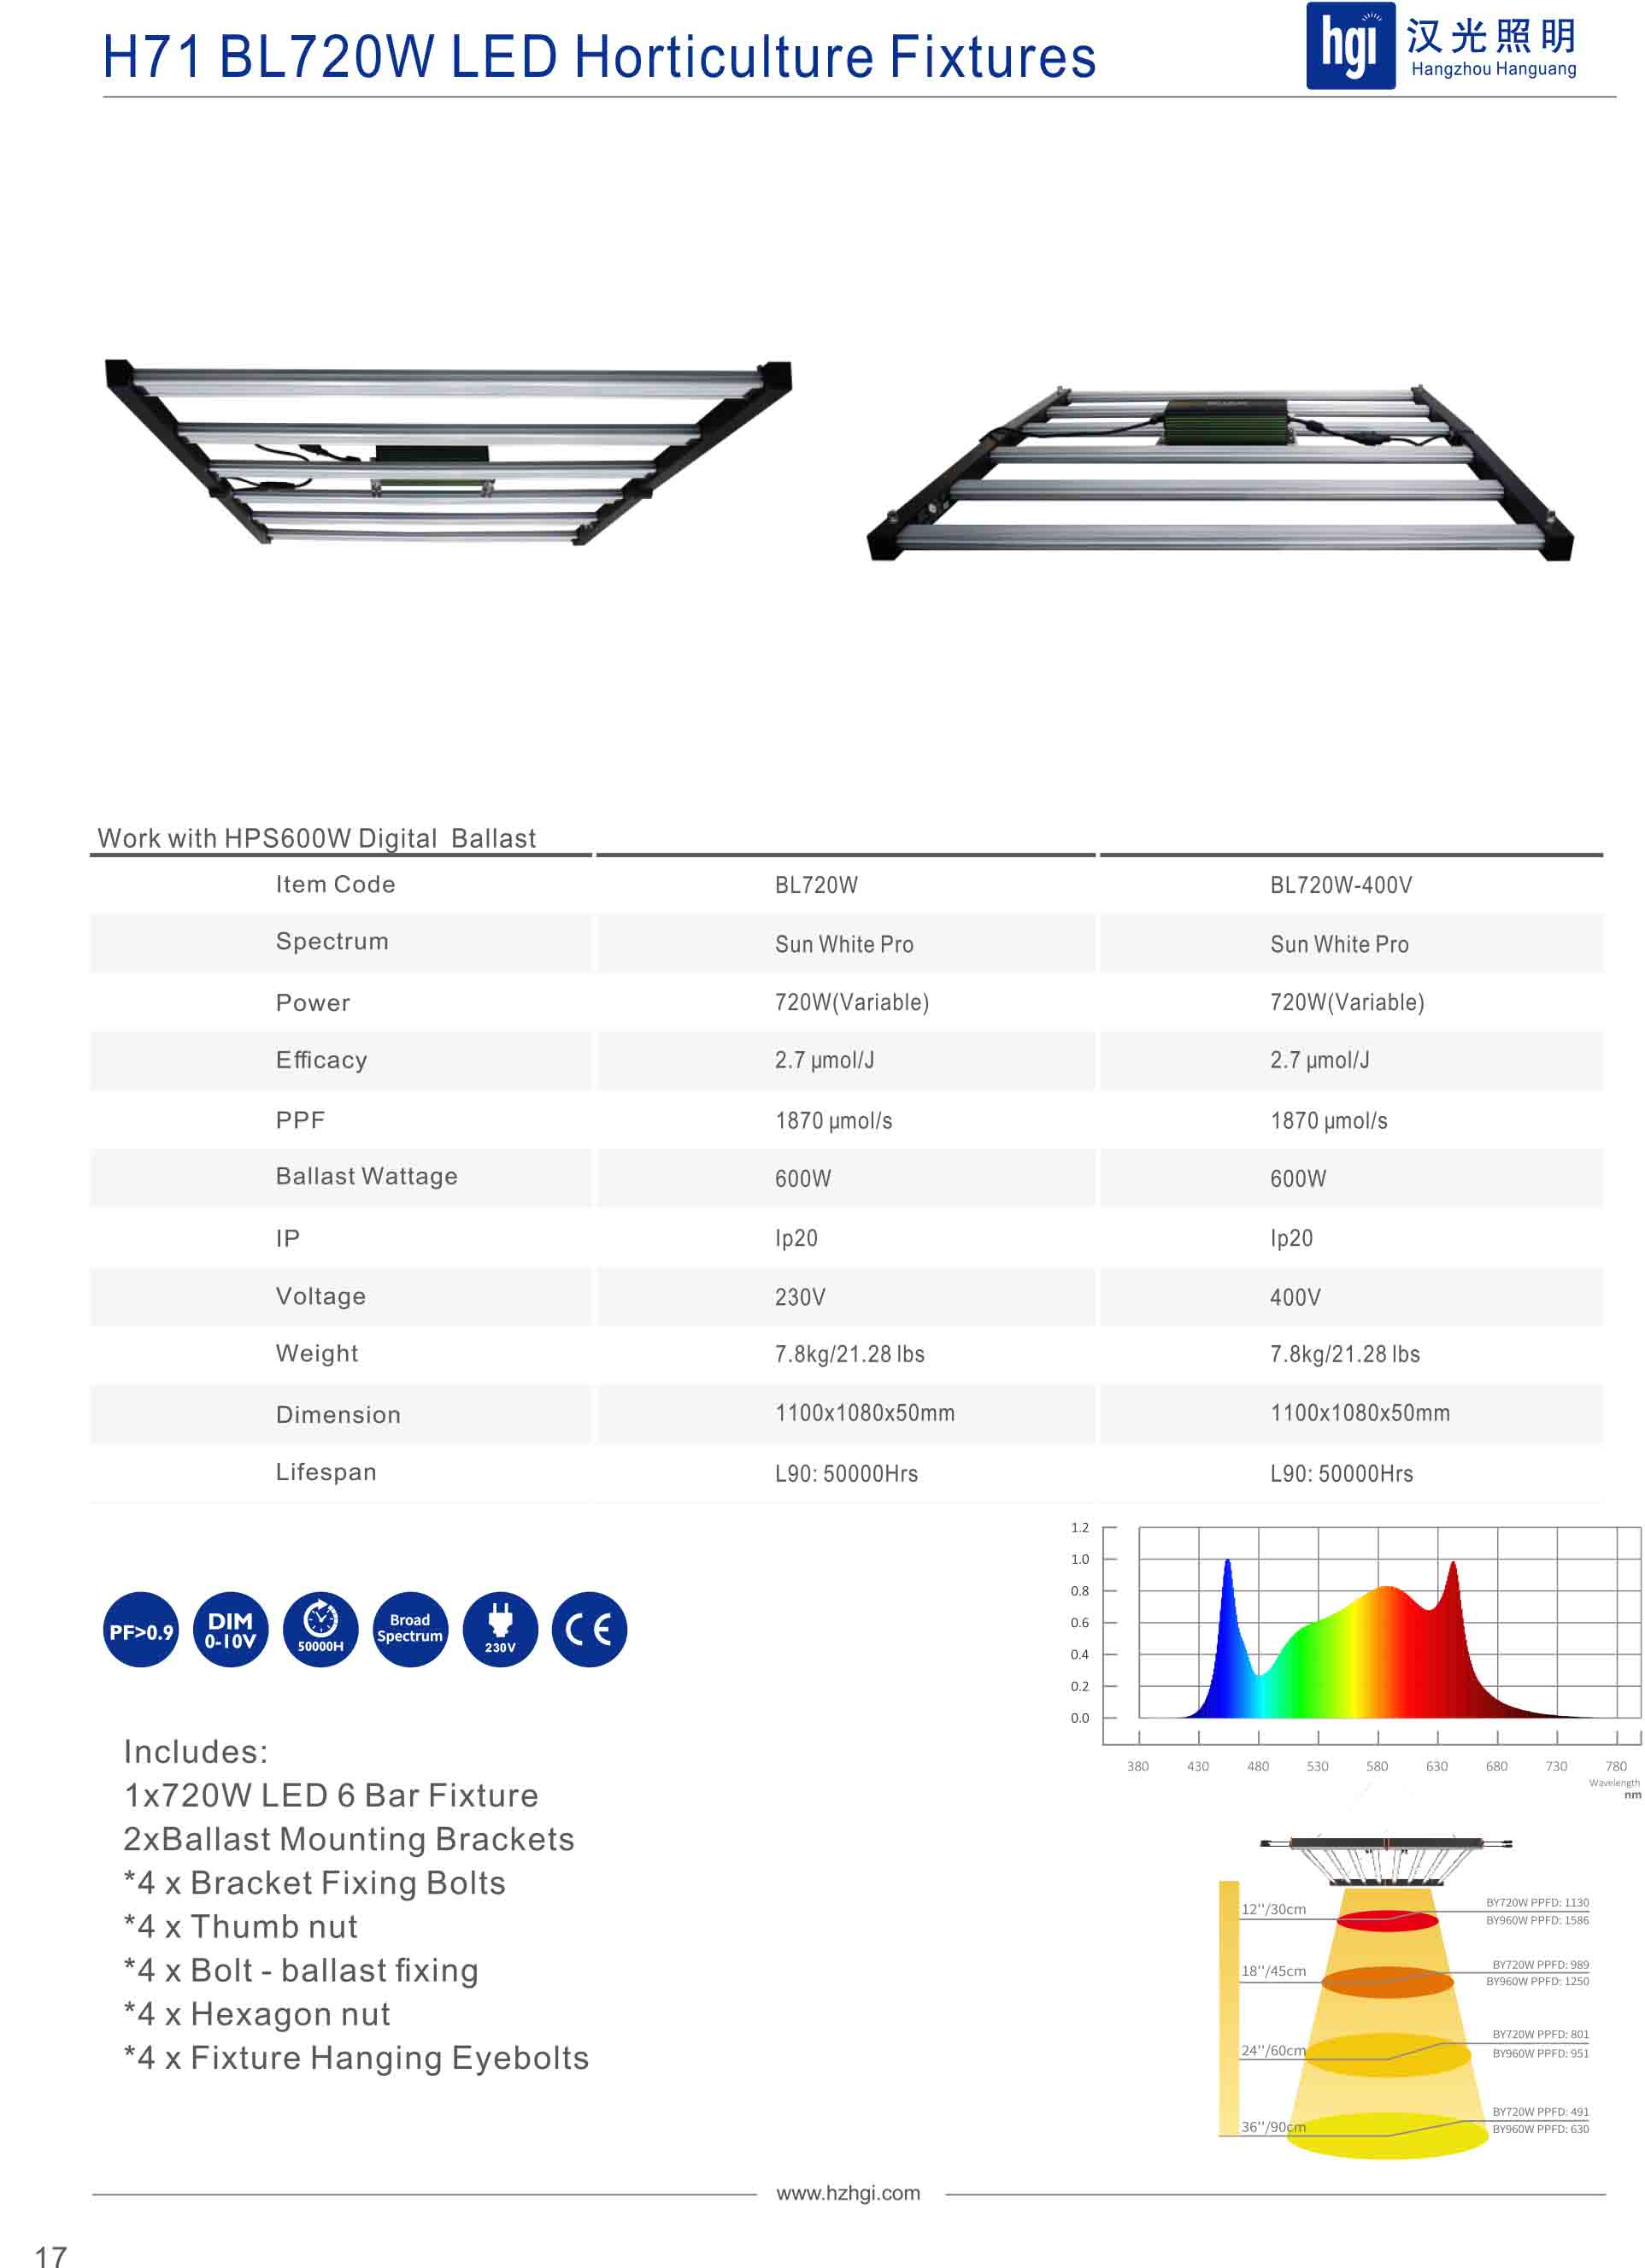 H71 BL720W LED Horticulture Fixtures